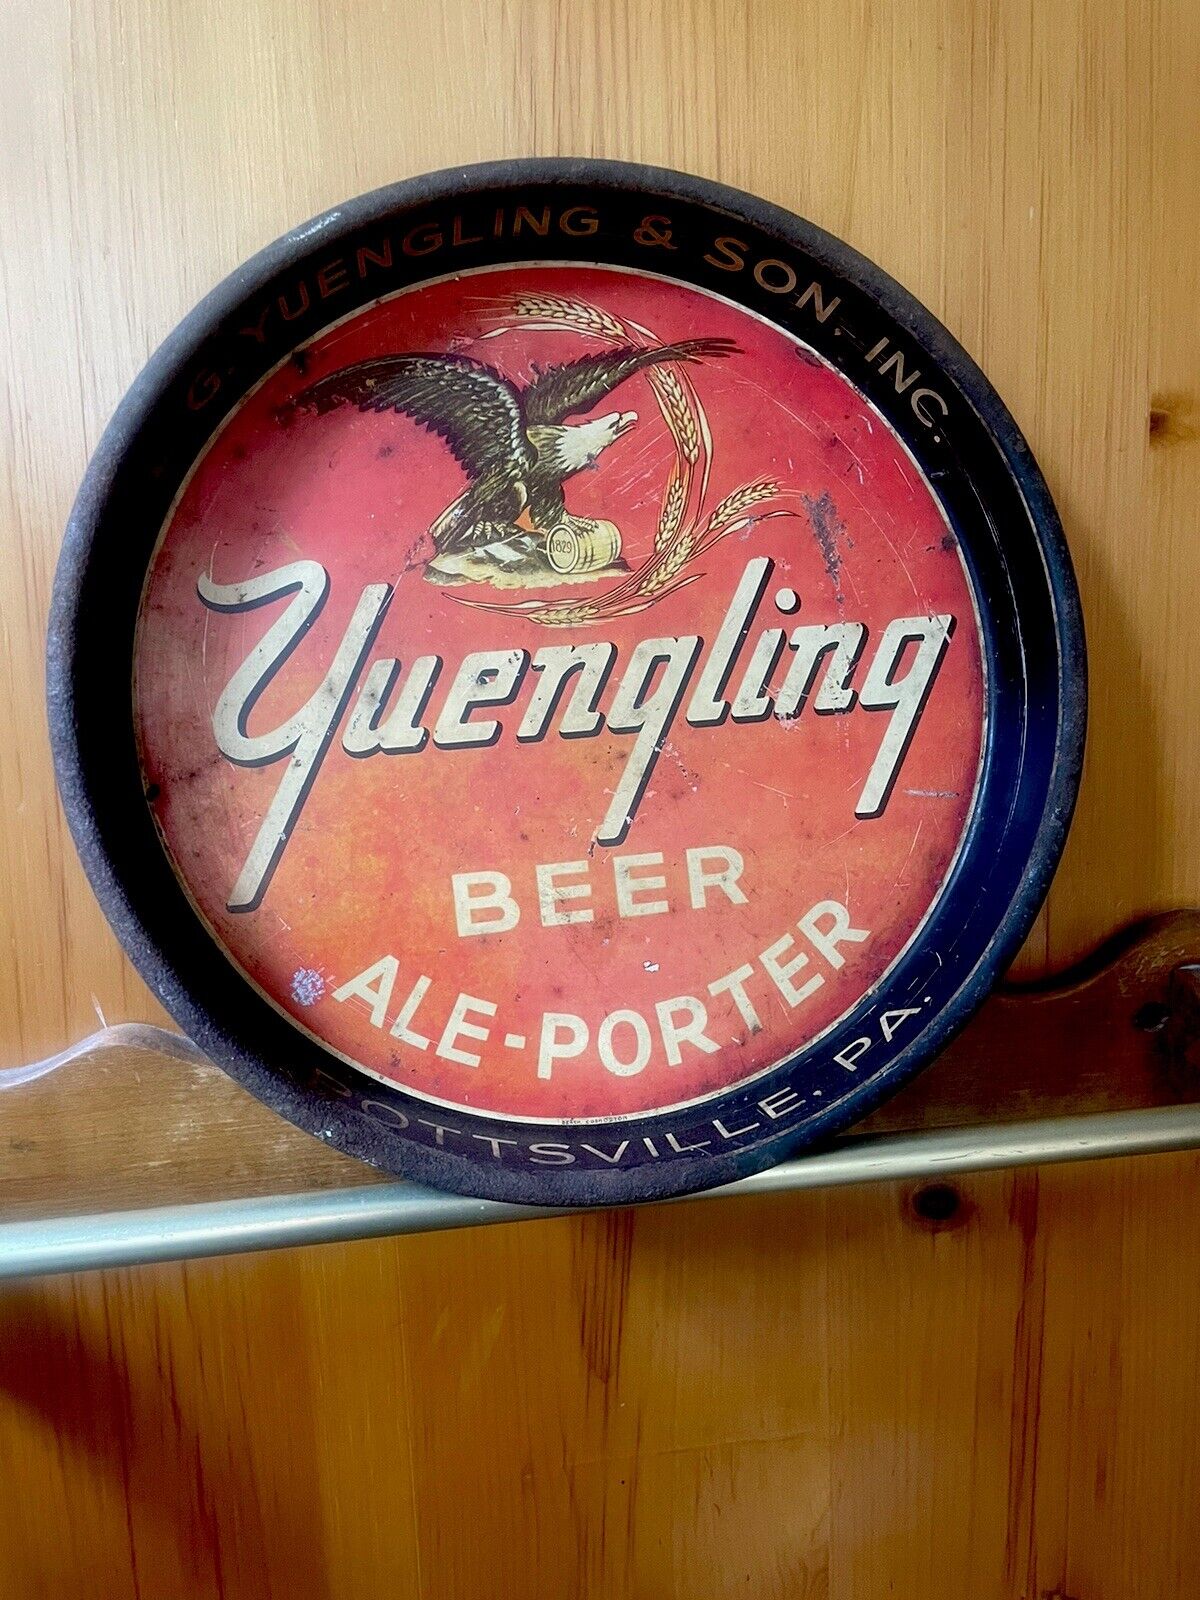 DG YUENGLING & SON Beer /Ale/Porter Tray (1940’s) Pottsville, PA. Hard to Find.